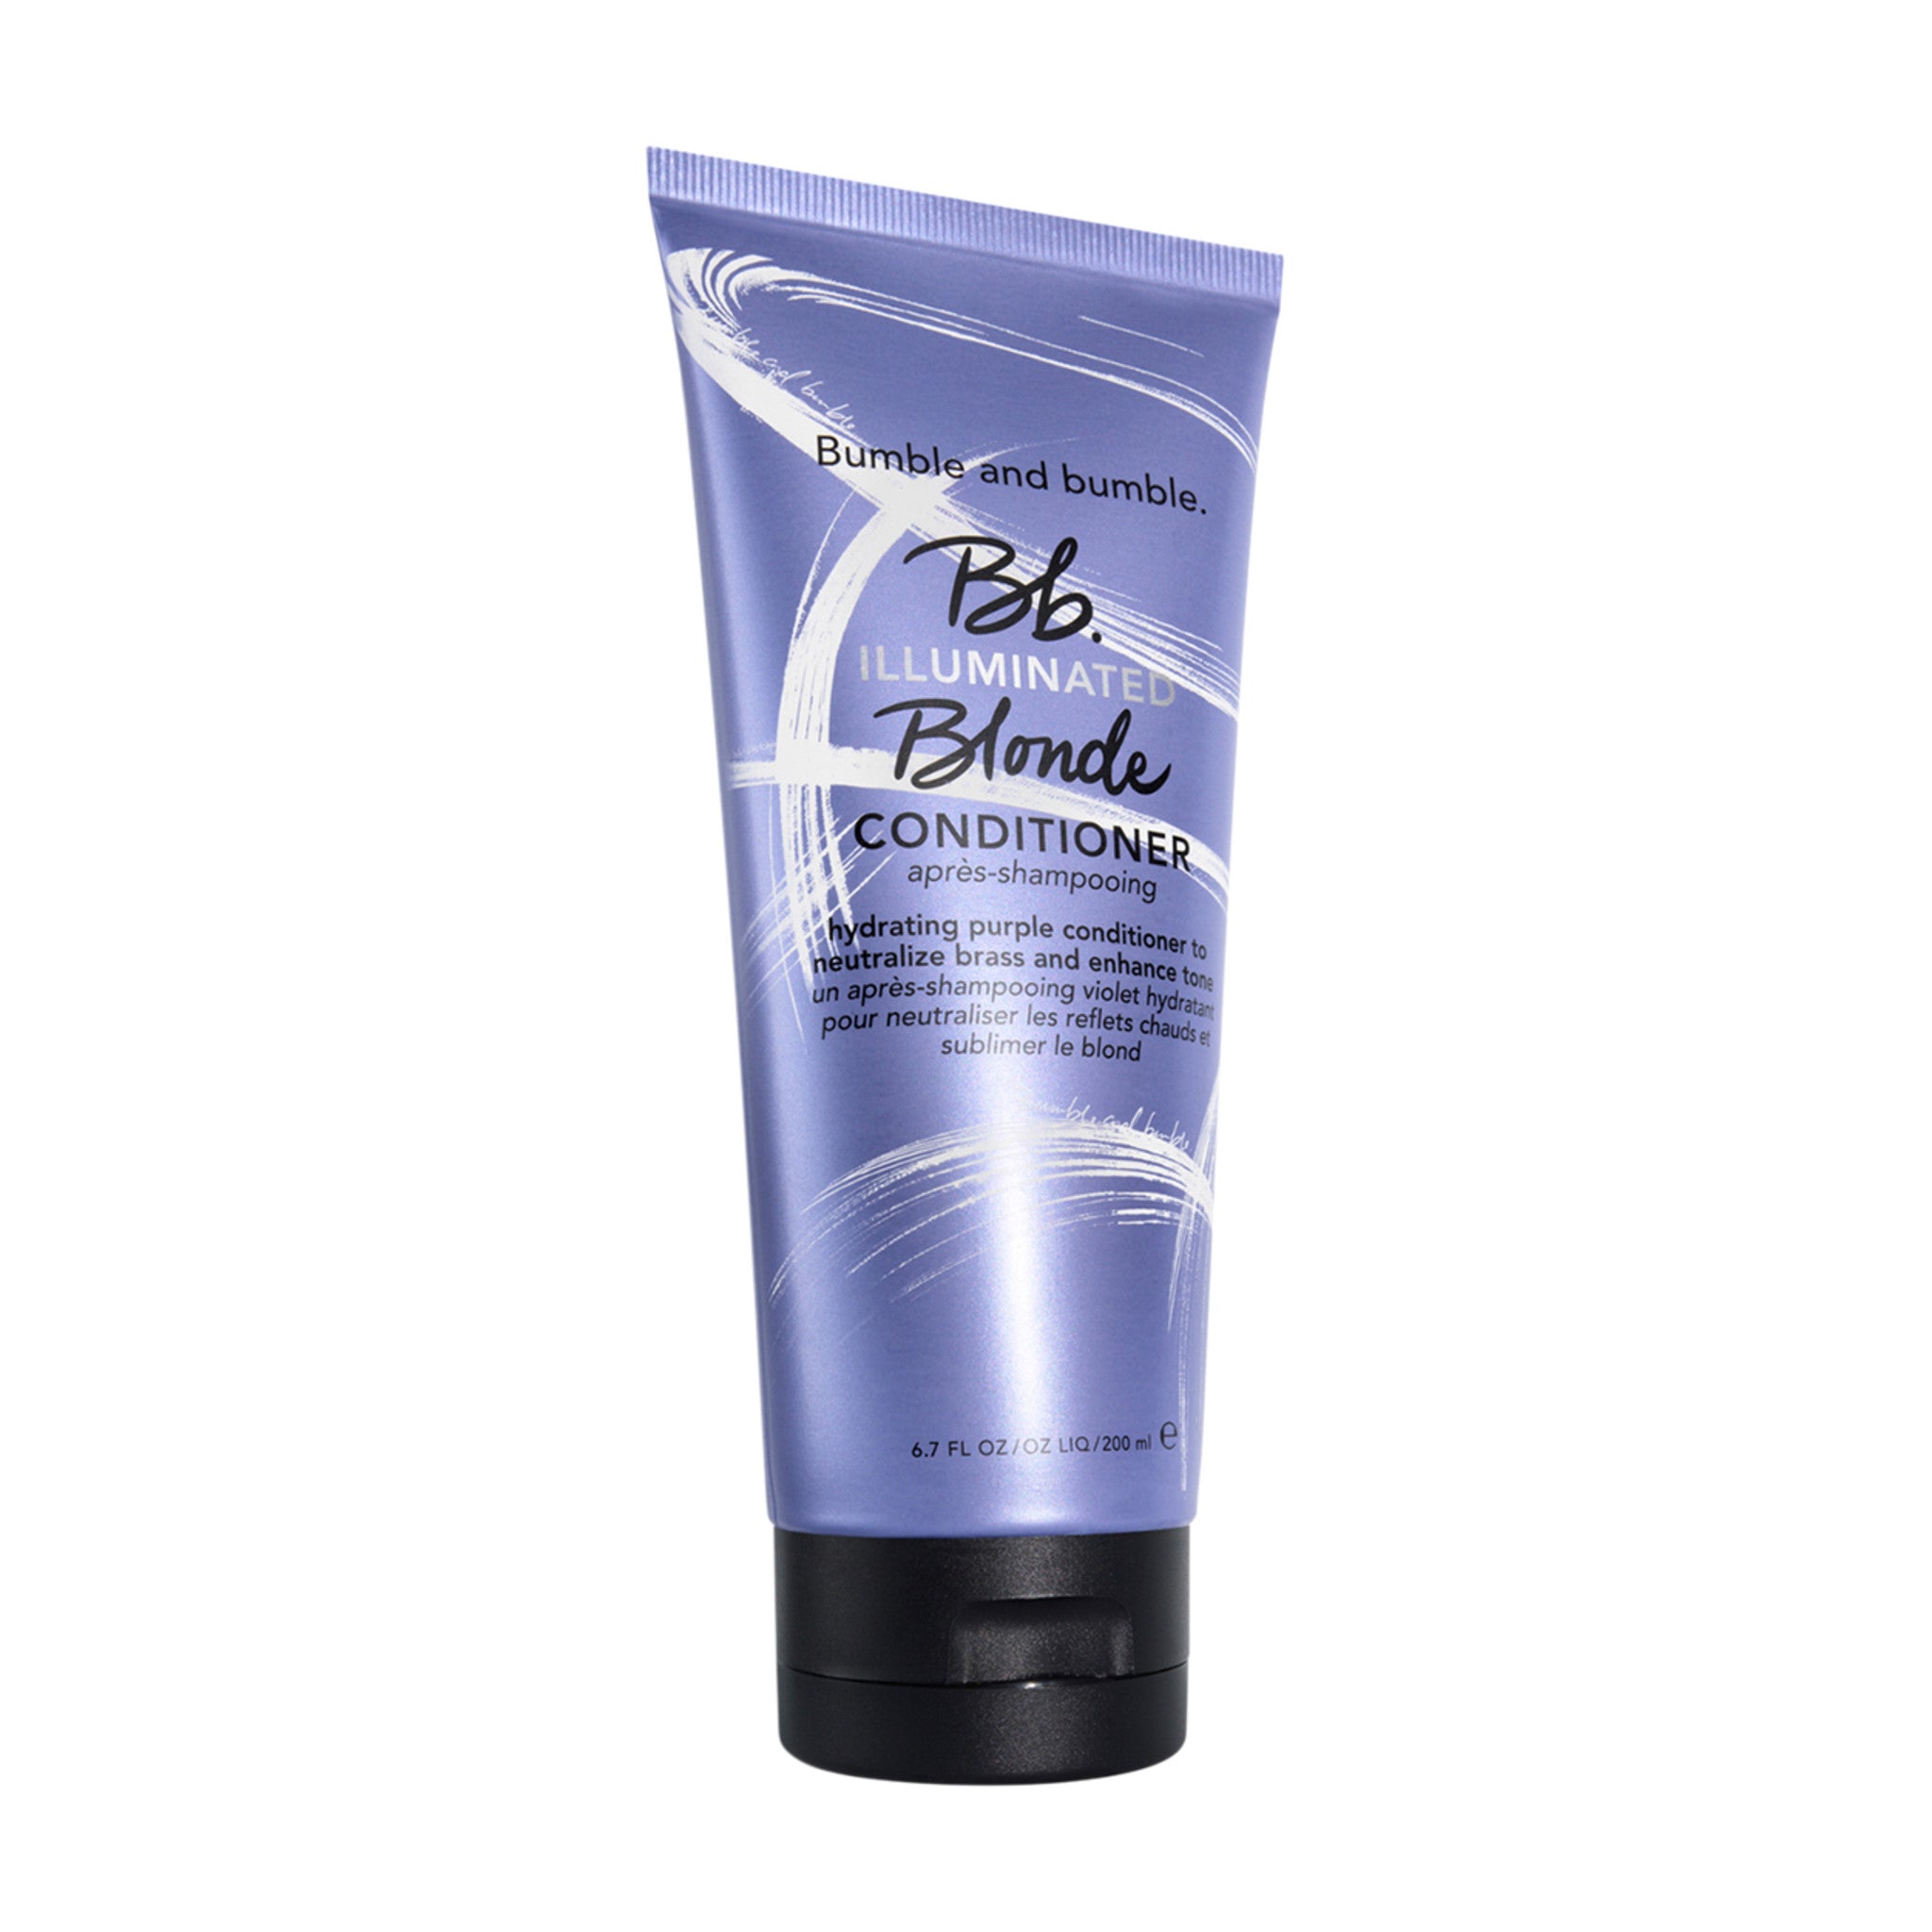 Bumble and Bumble Illuminated Blonde Conditioner Size variant: 6.7 oz main image.